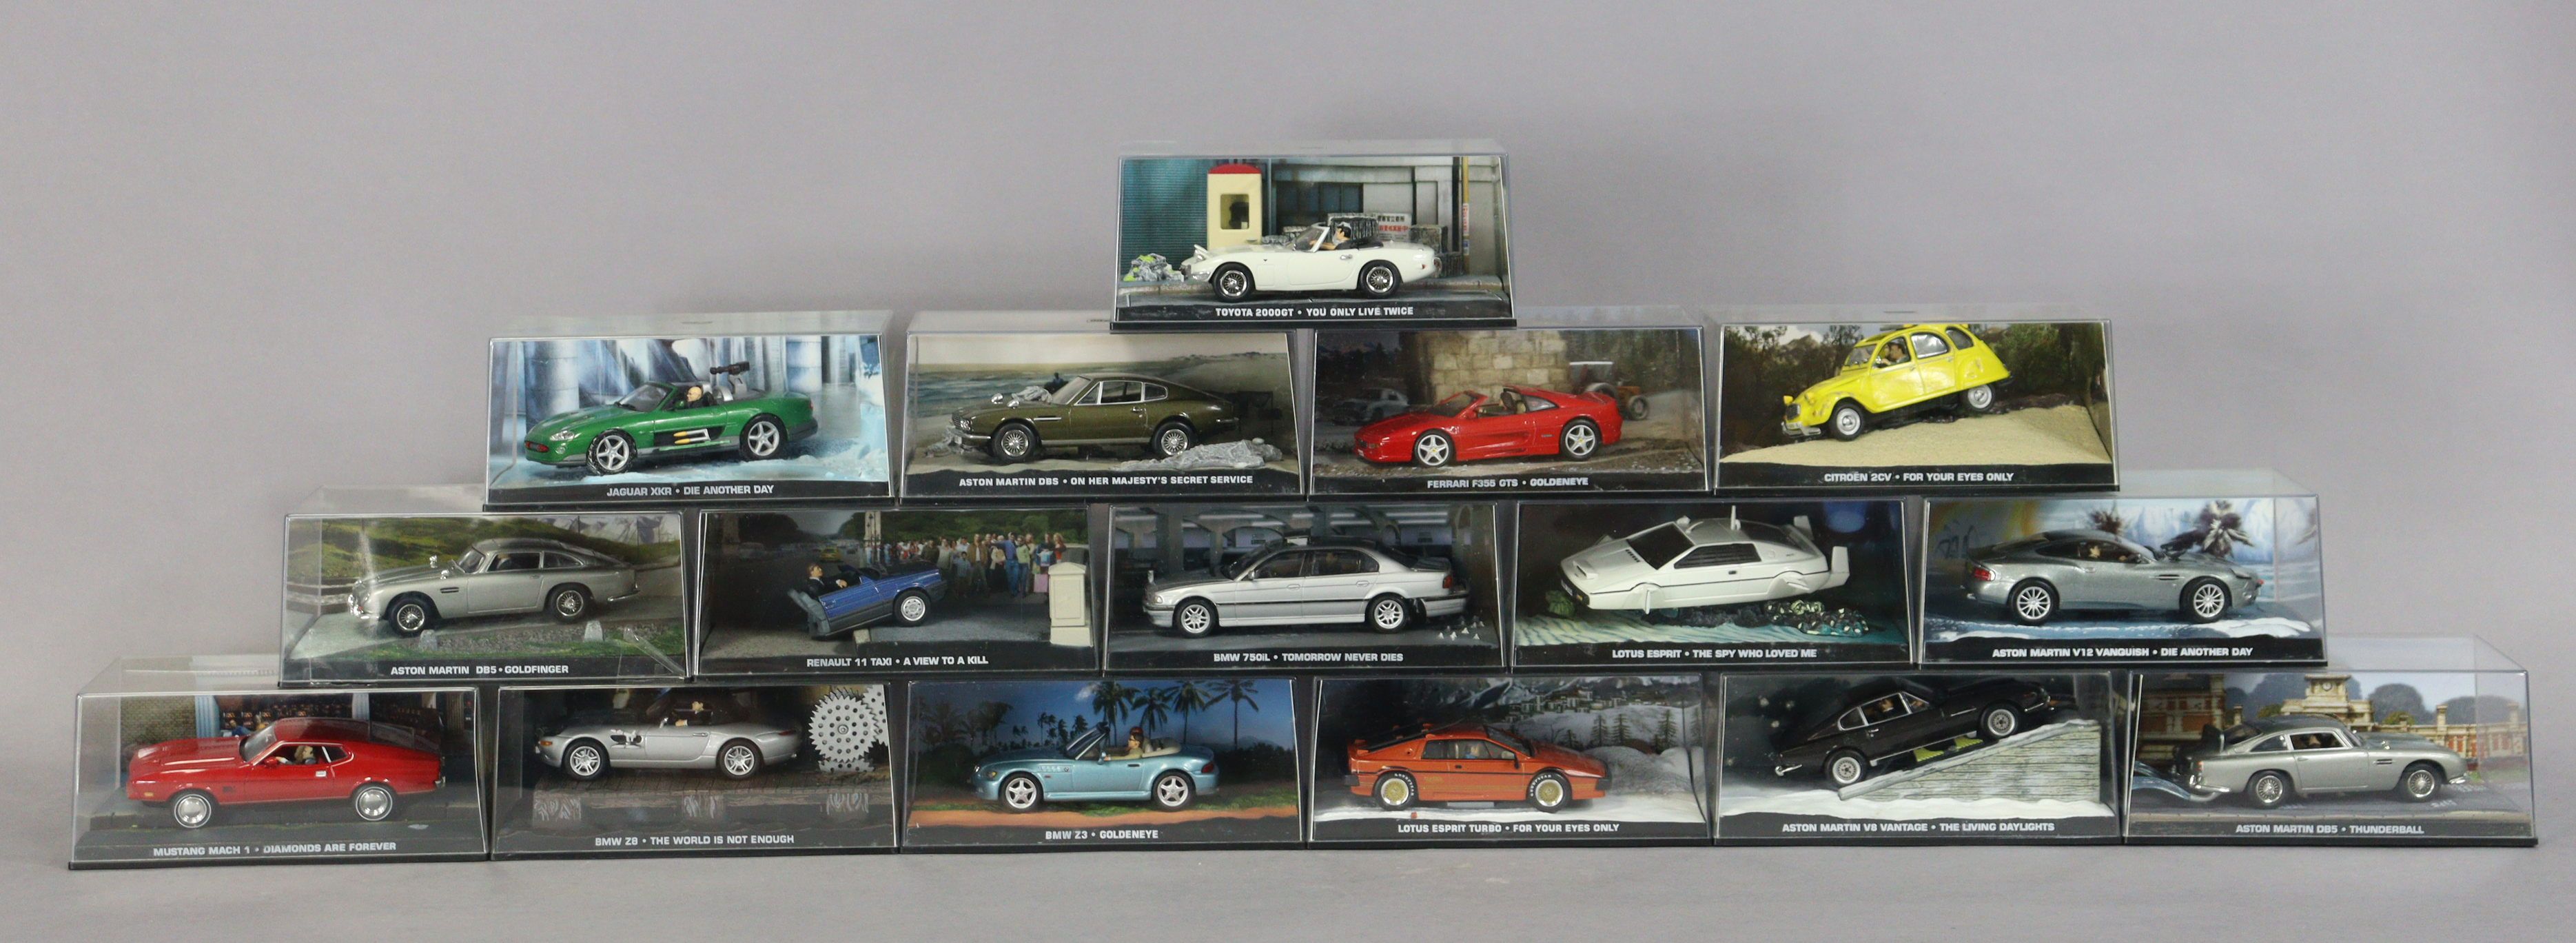 Sixteen “James Bond” car collection scale models, each with a window box.